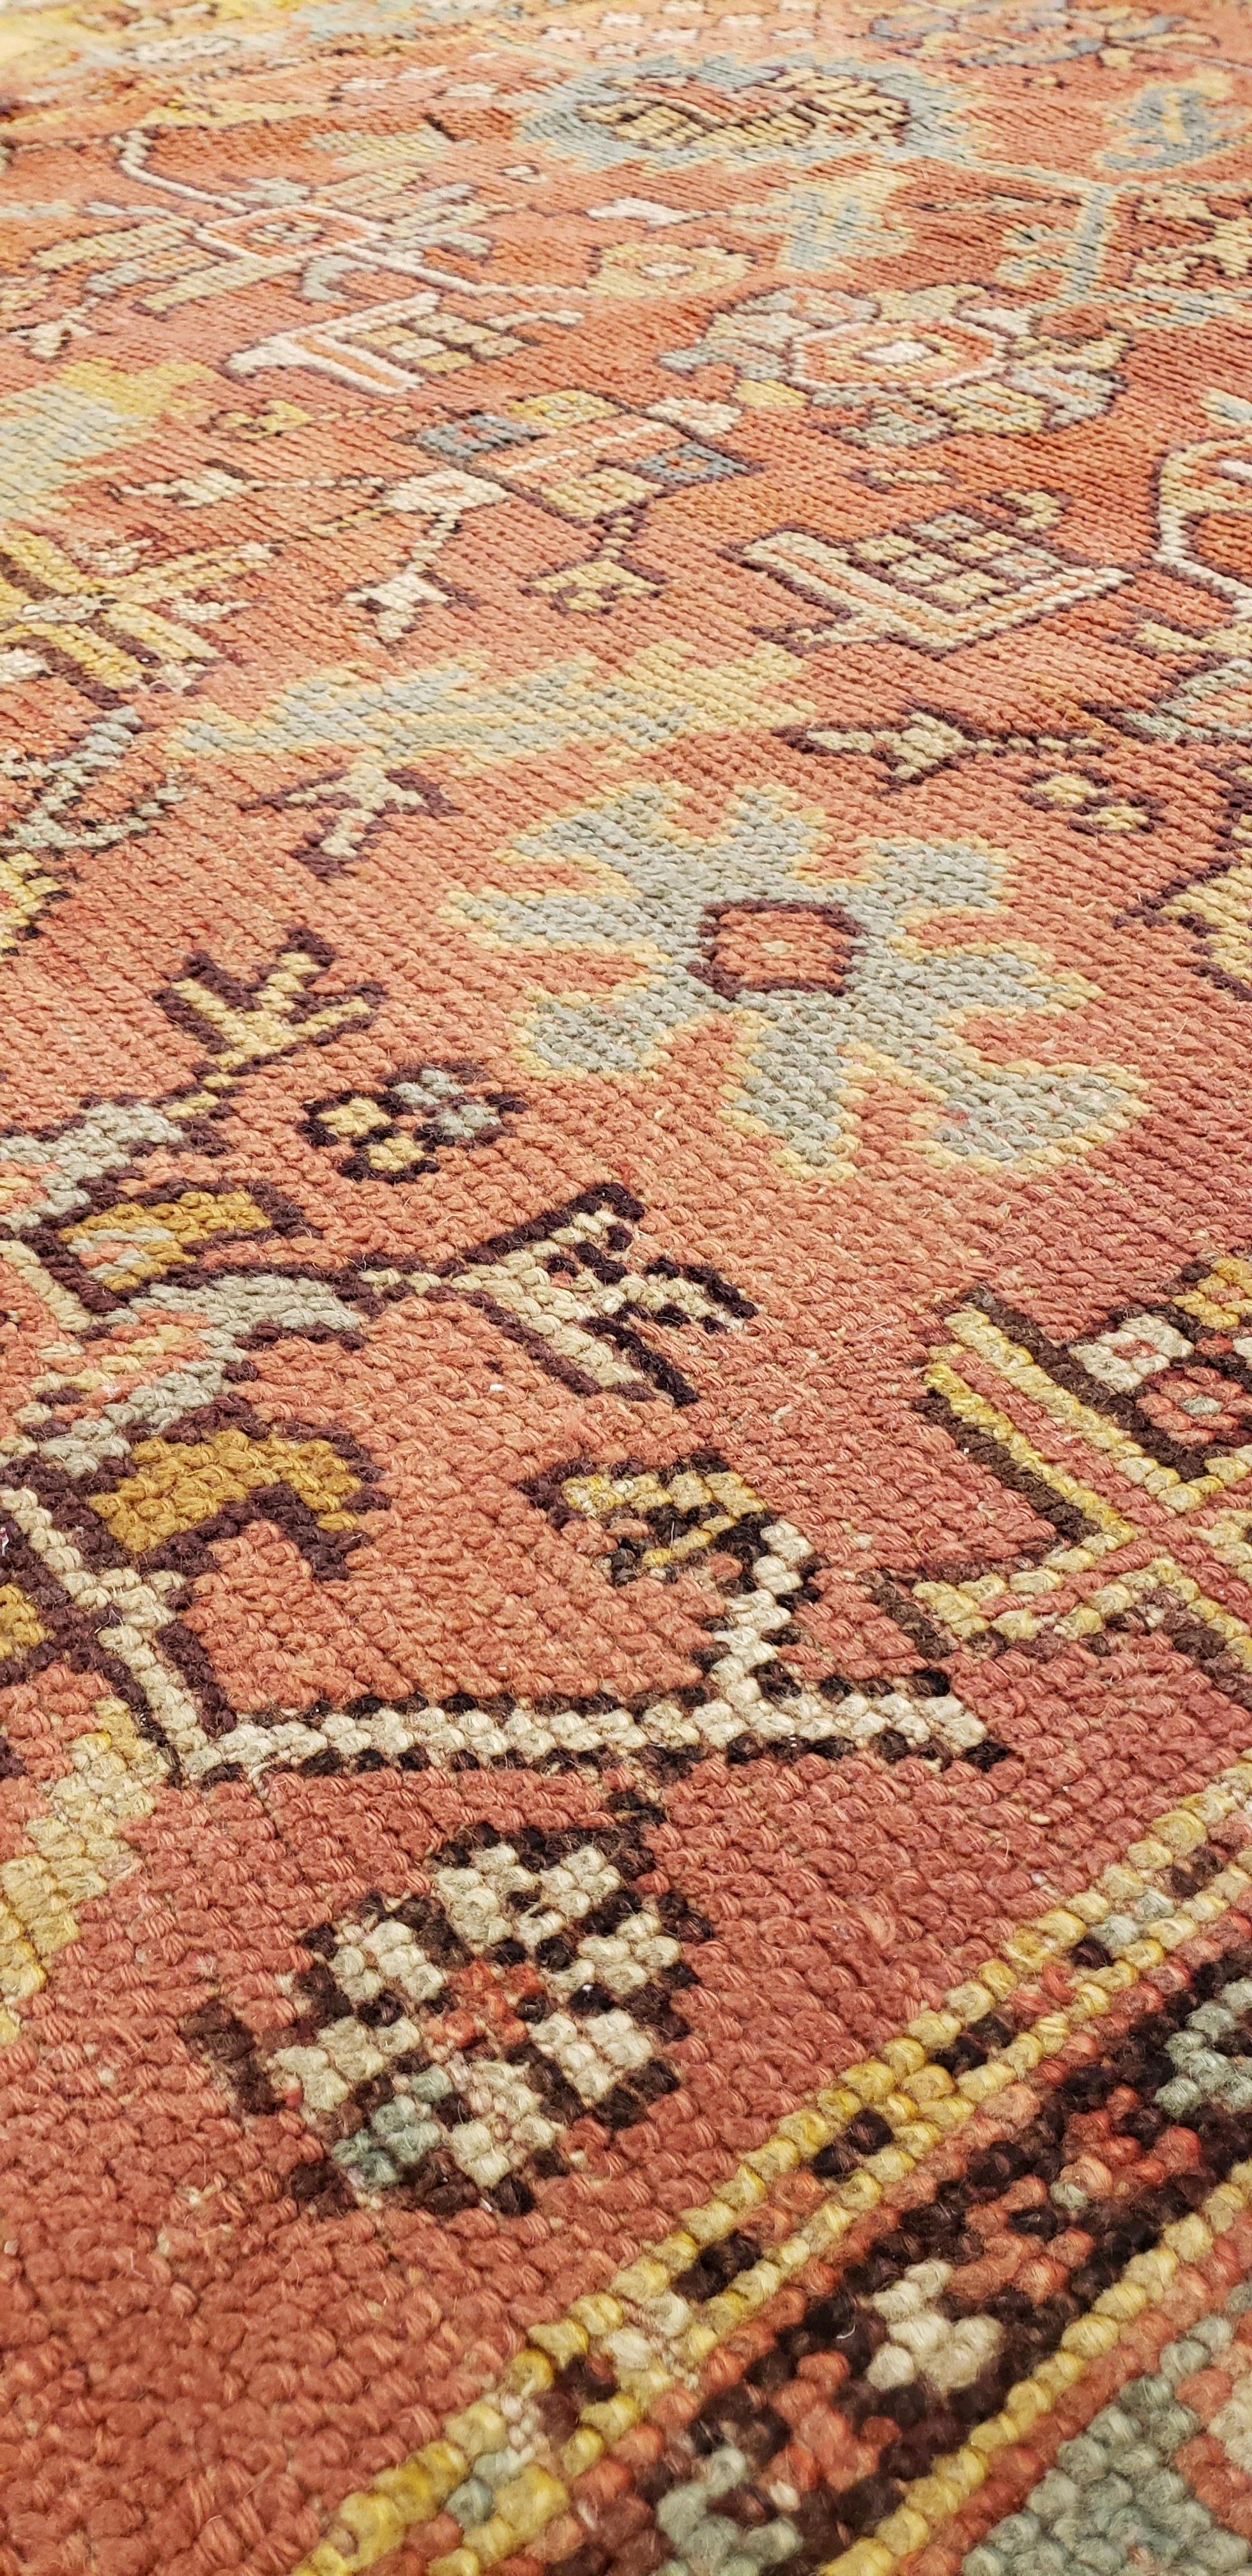 Antique Oushak Carpet, Oriental Rug, Handmade Rug Saffron, Light Blue and Coral In Good Condition For Sale In Port Washington, NY